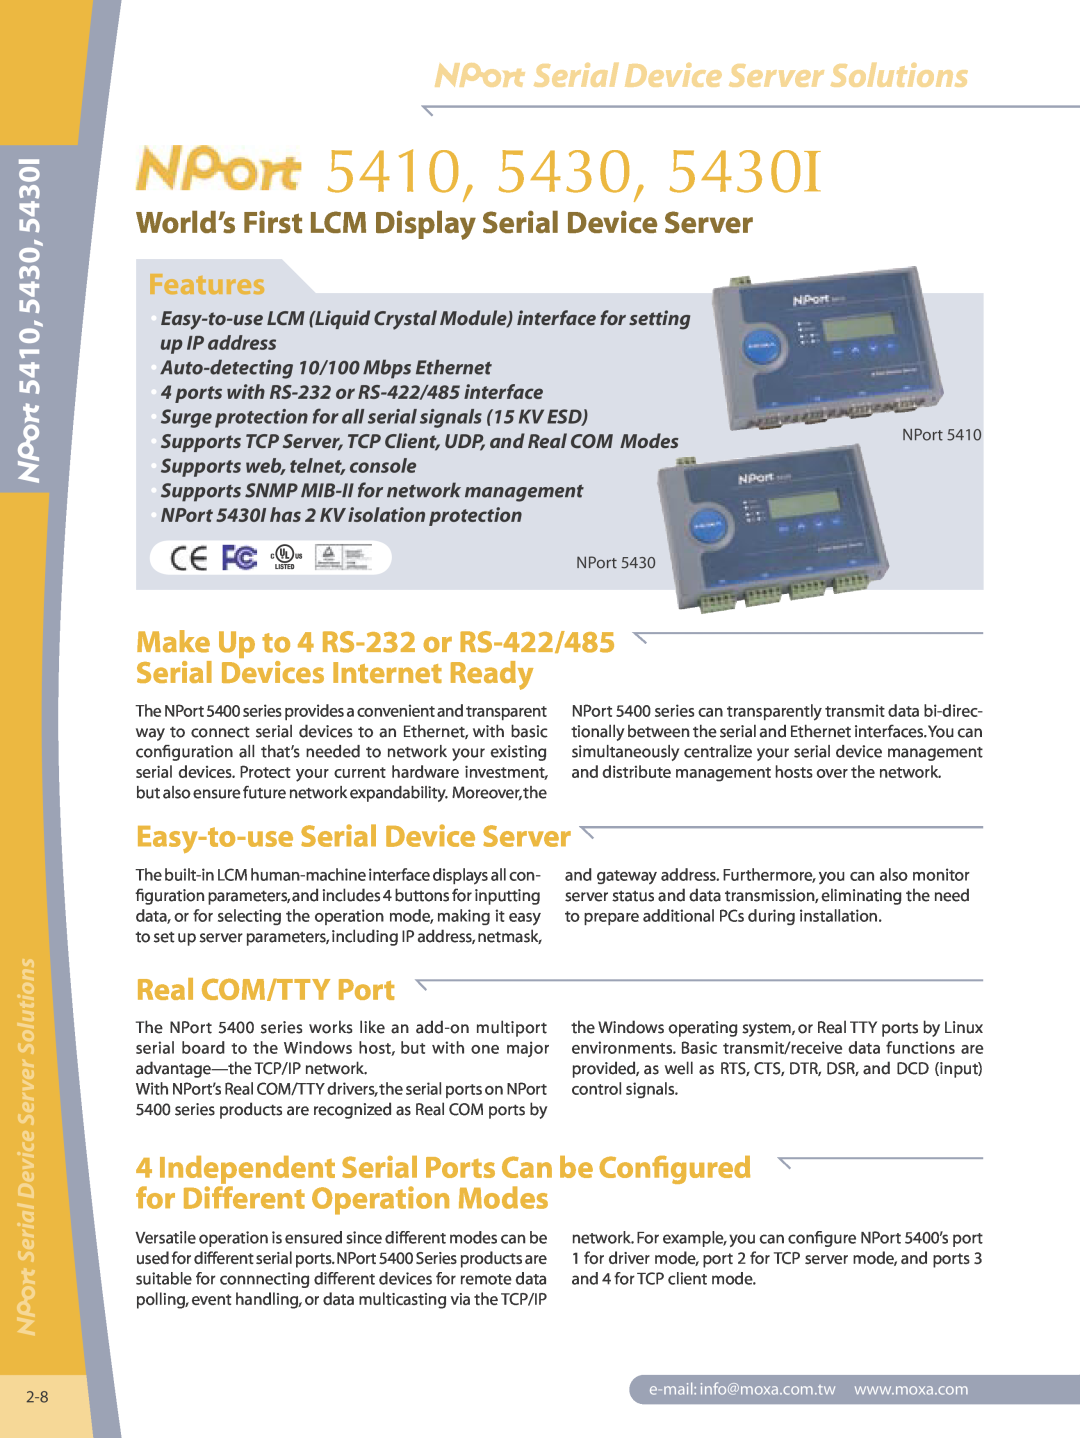 Moxa Technologies 5410 manual Serial Device Server Solutions, World’s First LCM Display Serial Device Server, Features 